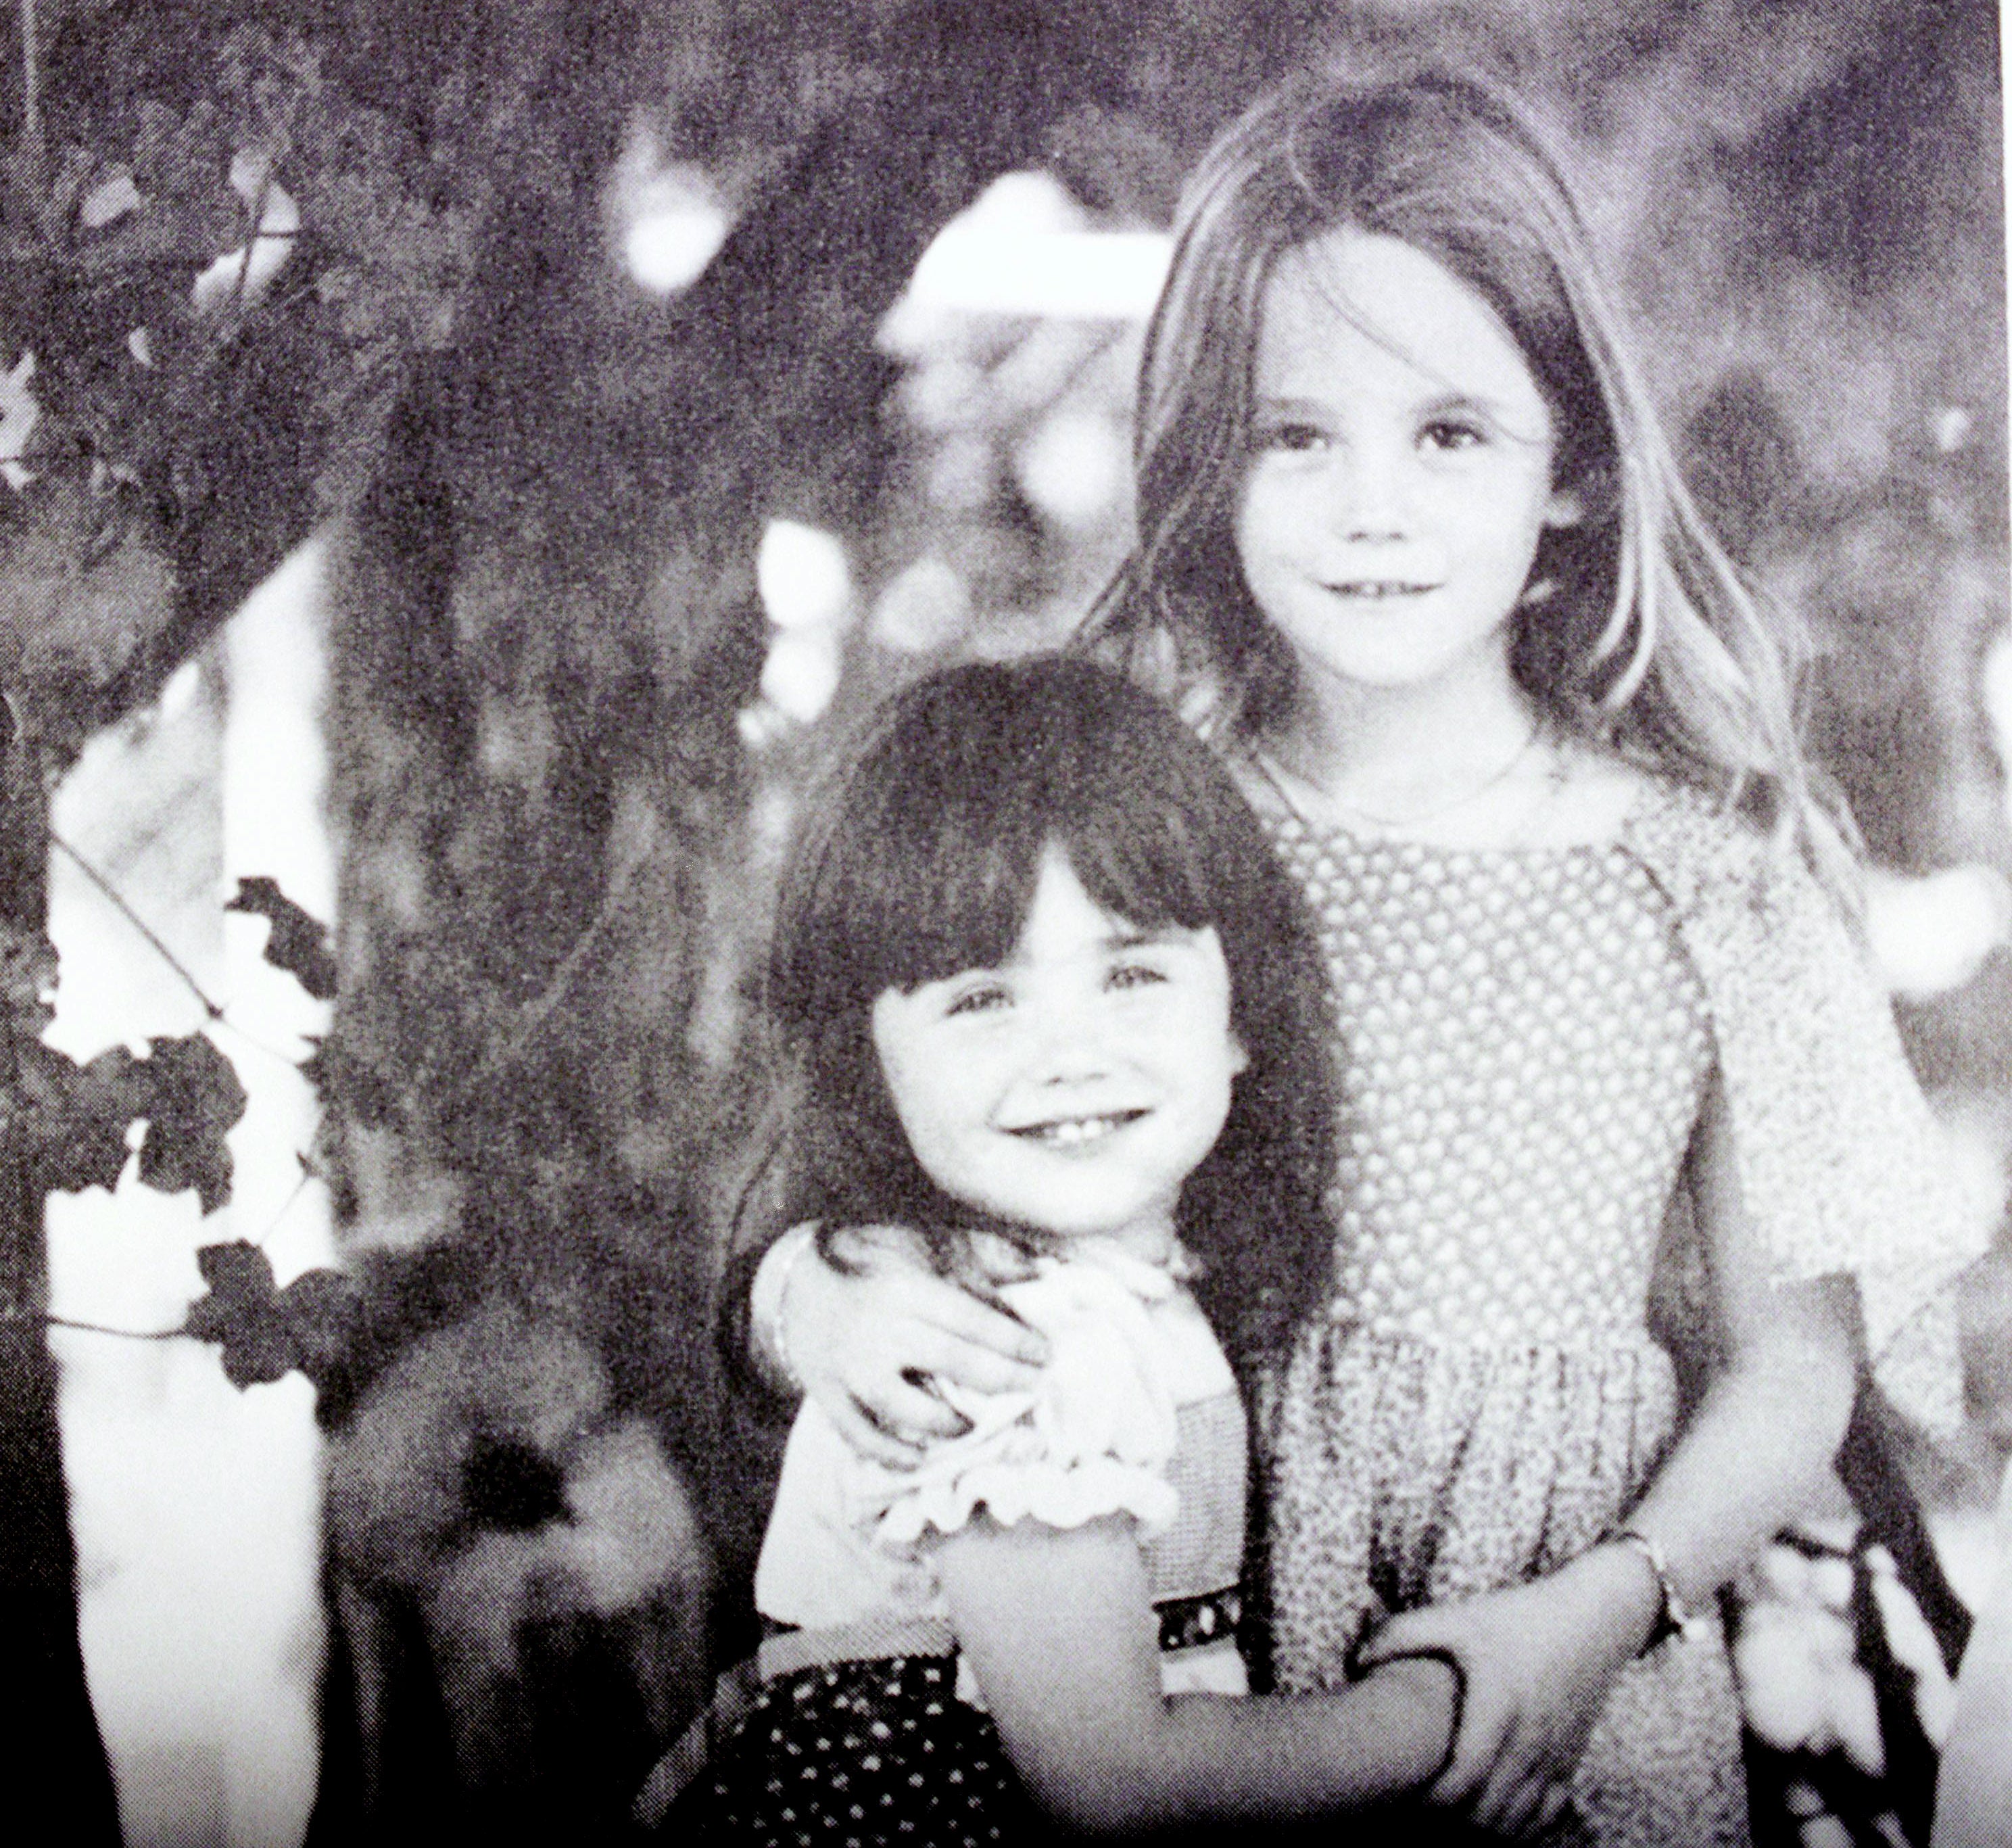 Lana Wood and Natalie Wood as children